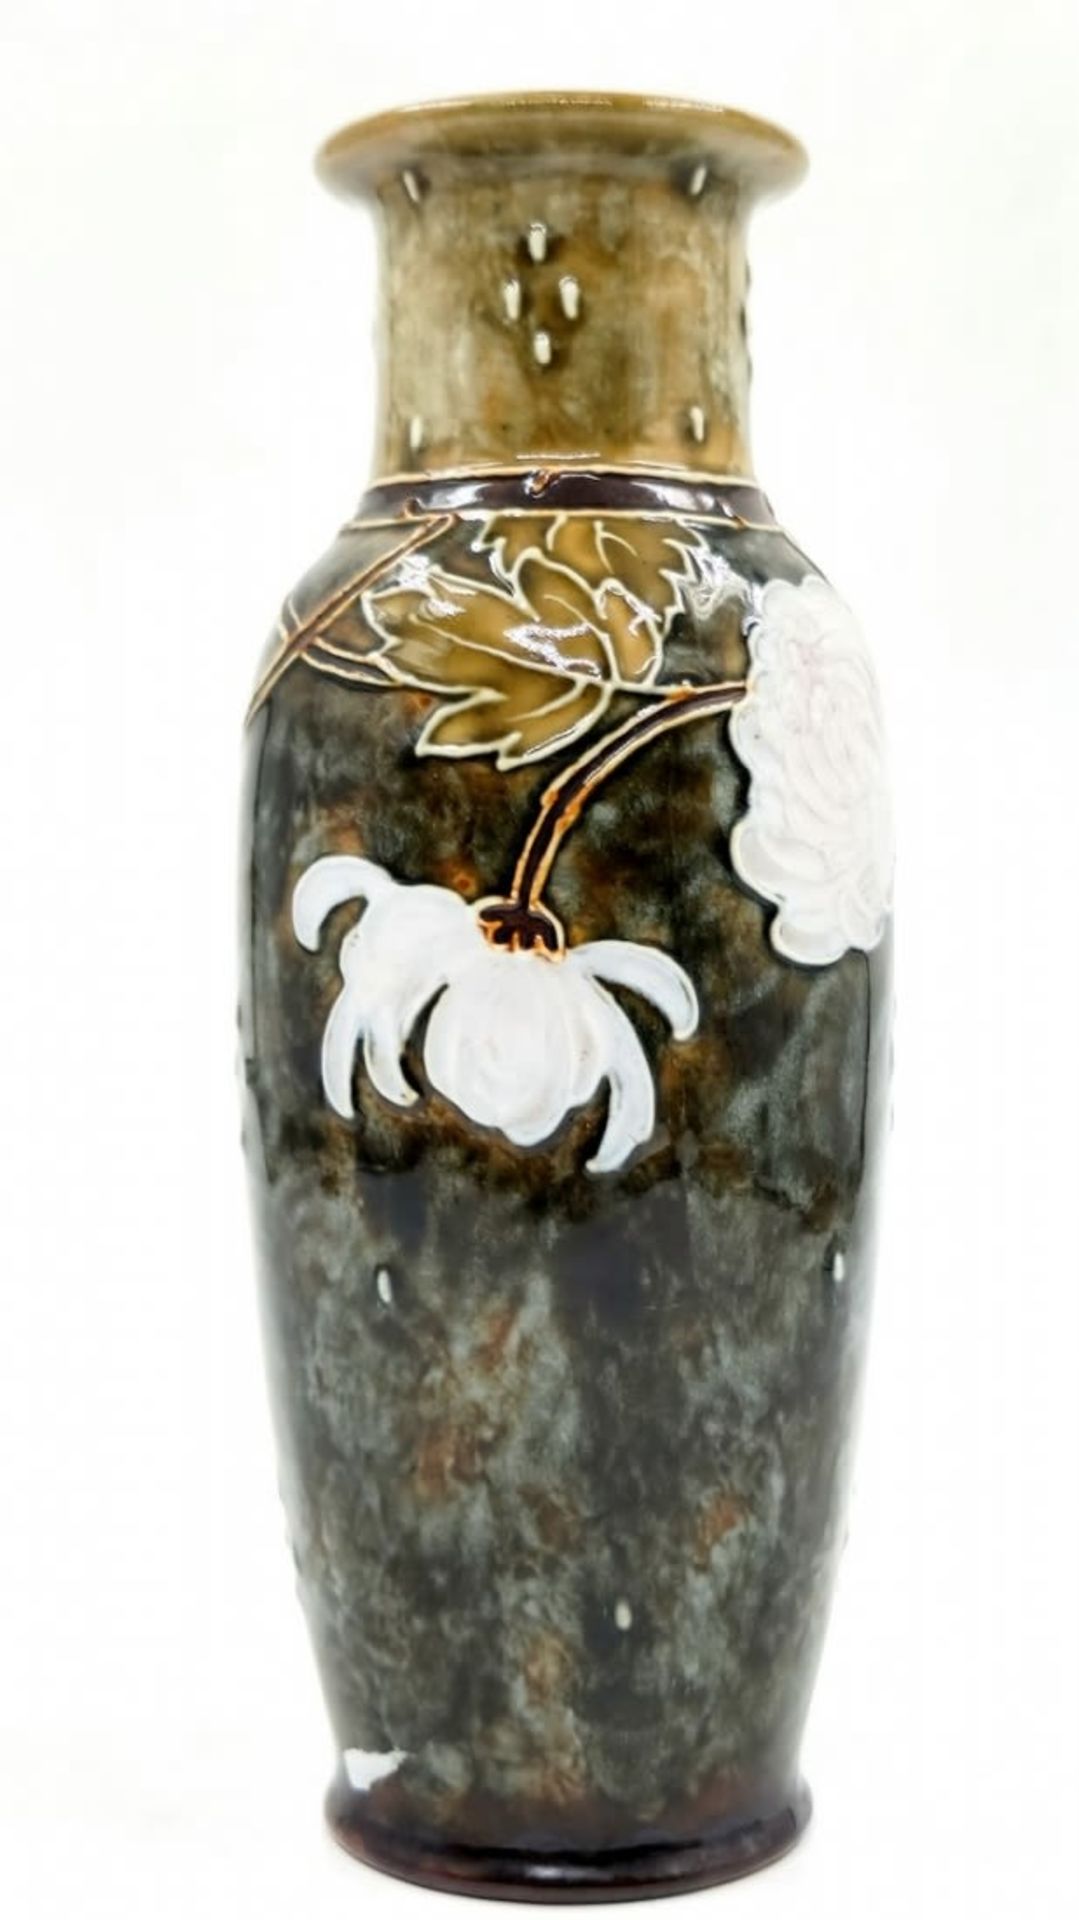 Antique English ceramic vase, made by 'Royal Doulton' , decorated and signed, more than a century